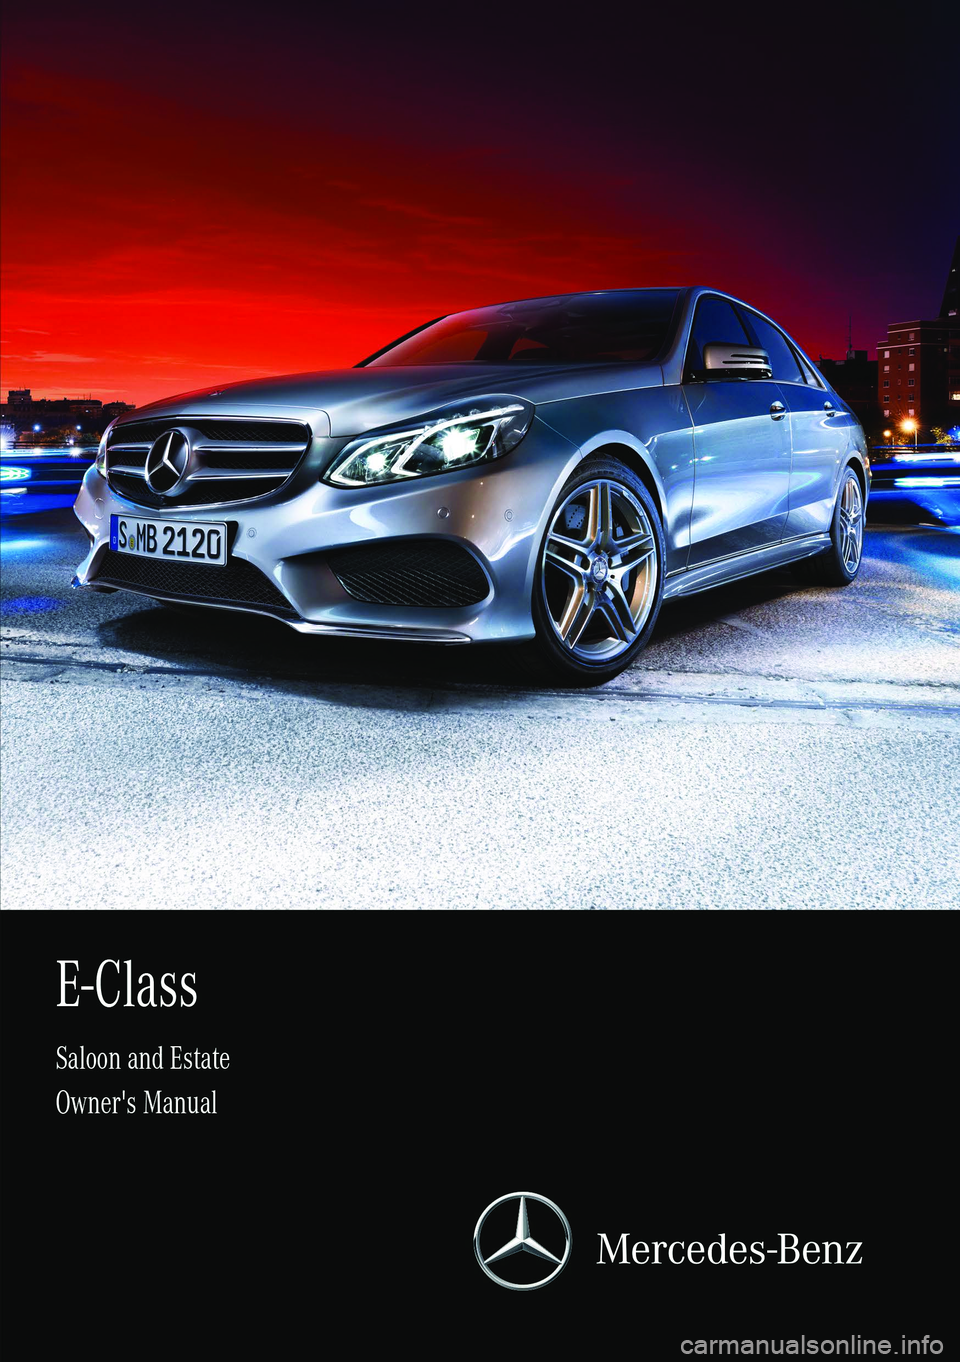 MERCEDES-BENZ E-CLASS SALOON 2015  Owners Manual 